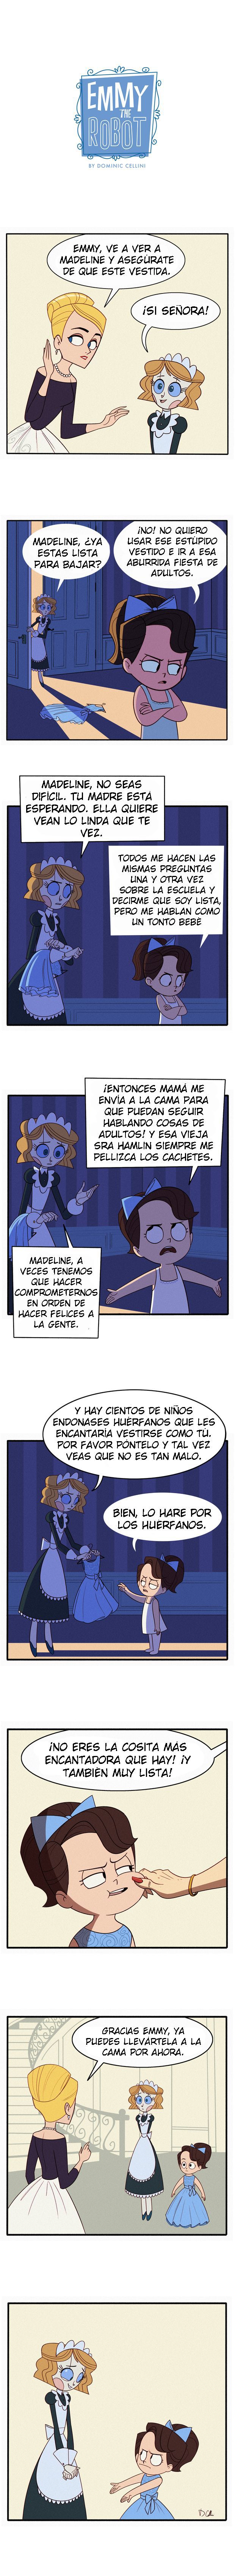 Emmy The Robot [Spanish] (Ongoing) 34